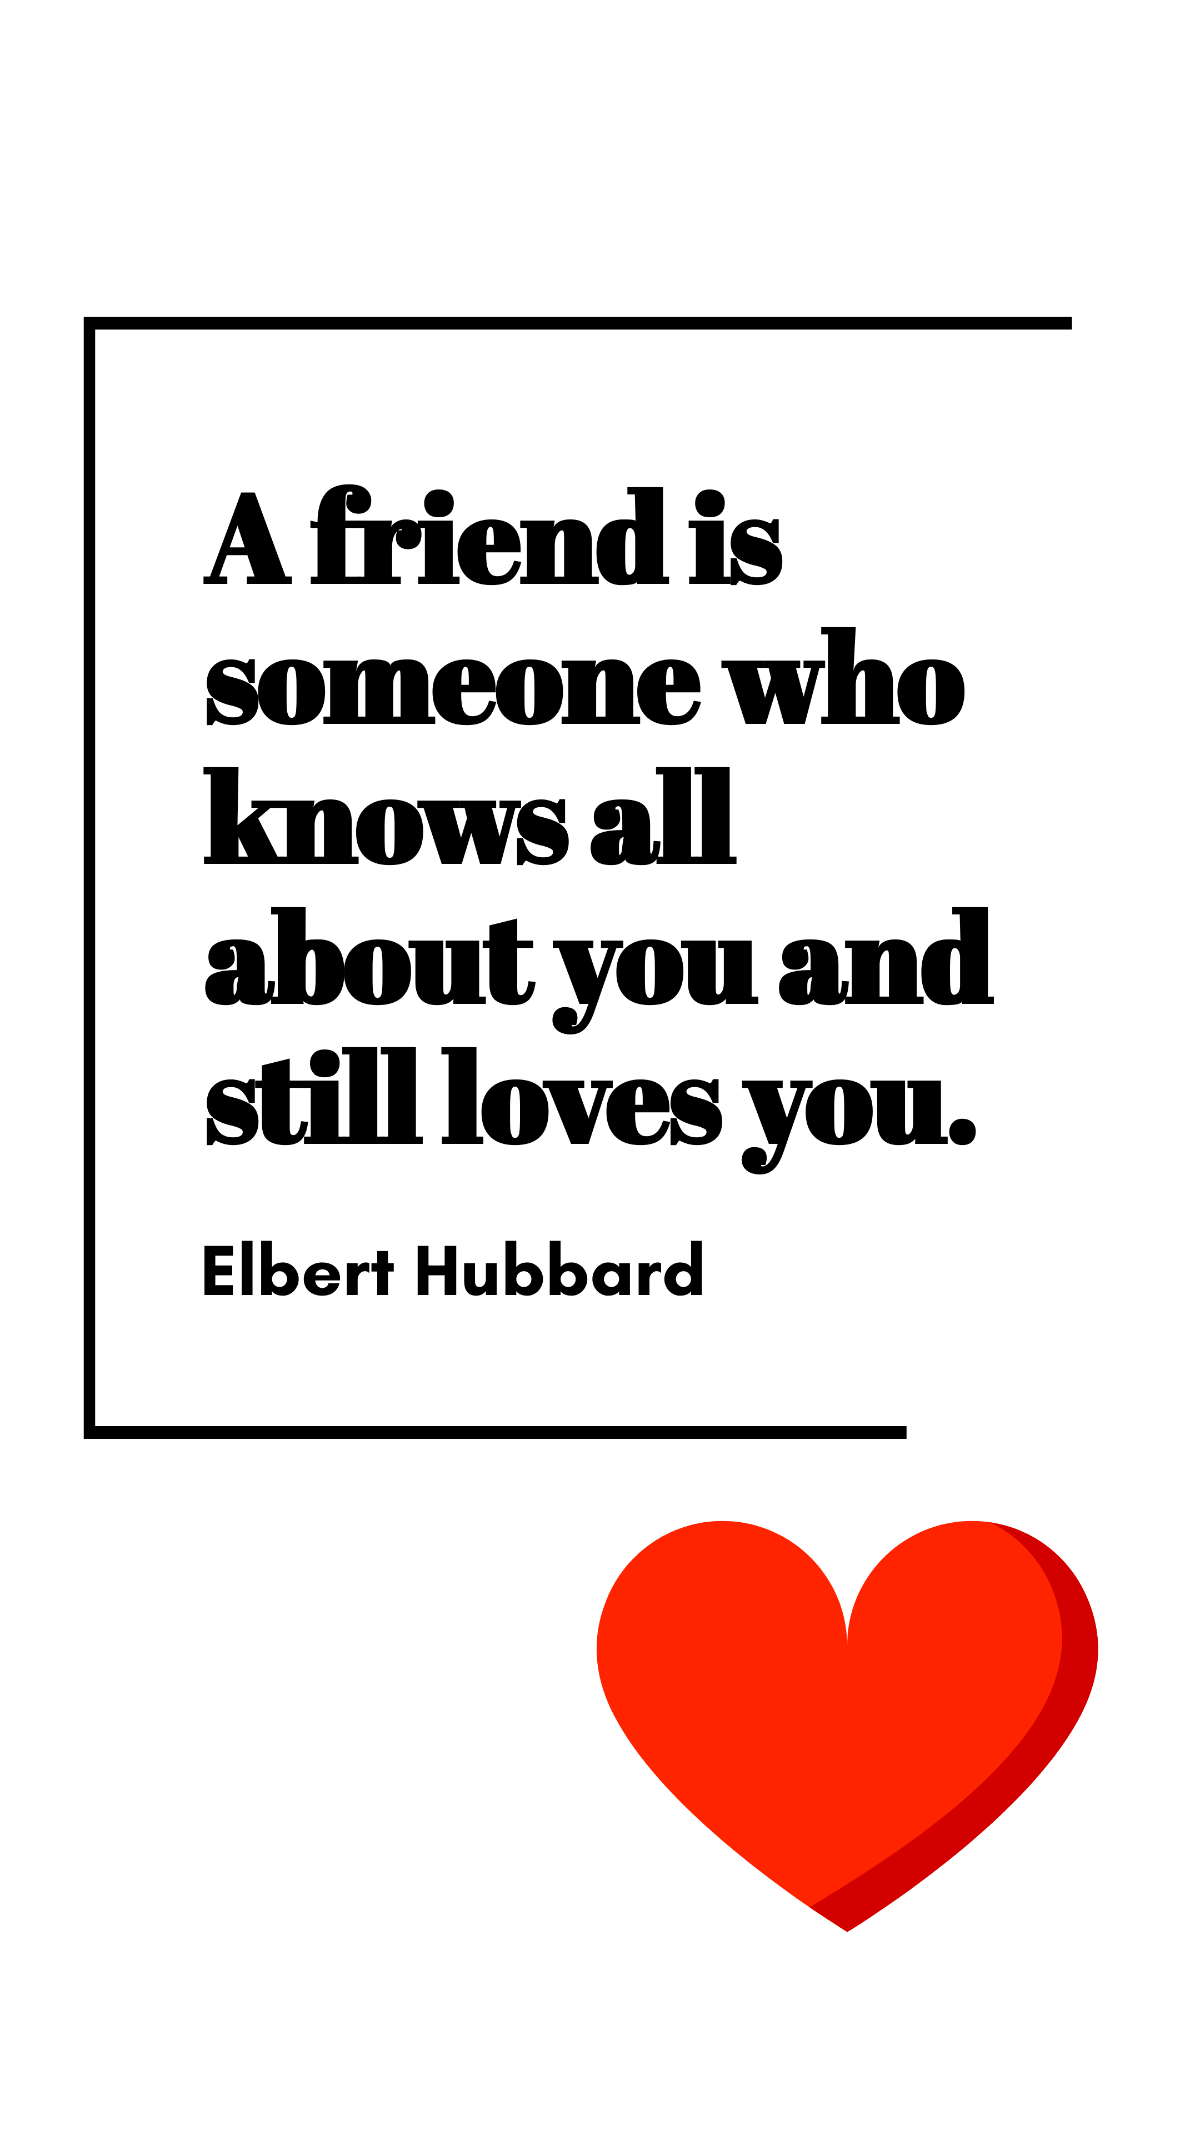 Elbert Hubbard - A friend is someone who knows all about you and still loves you. Template